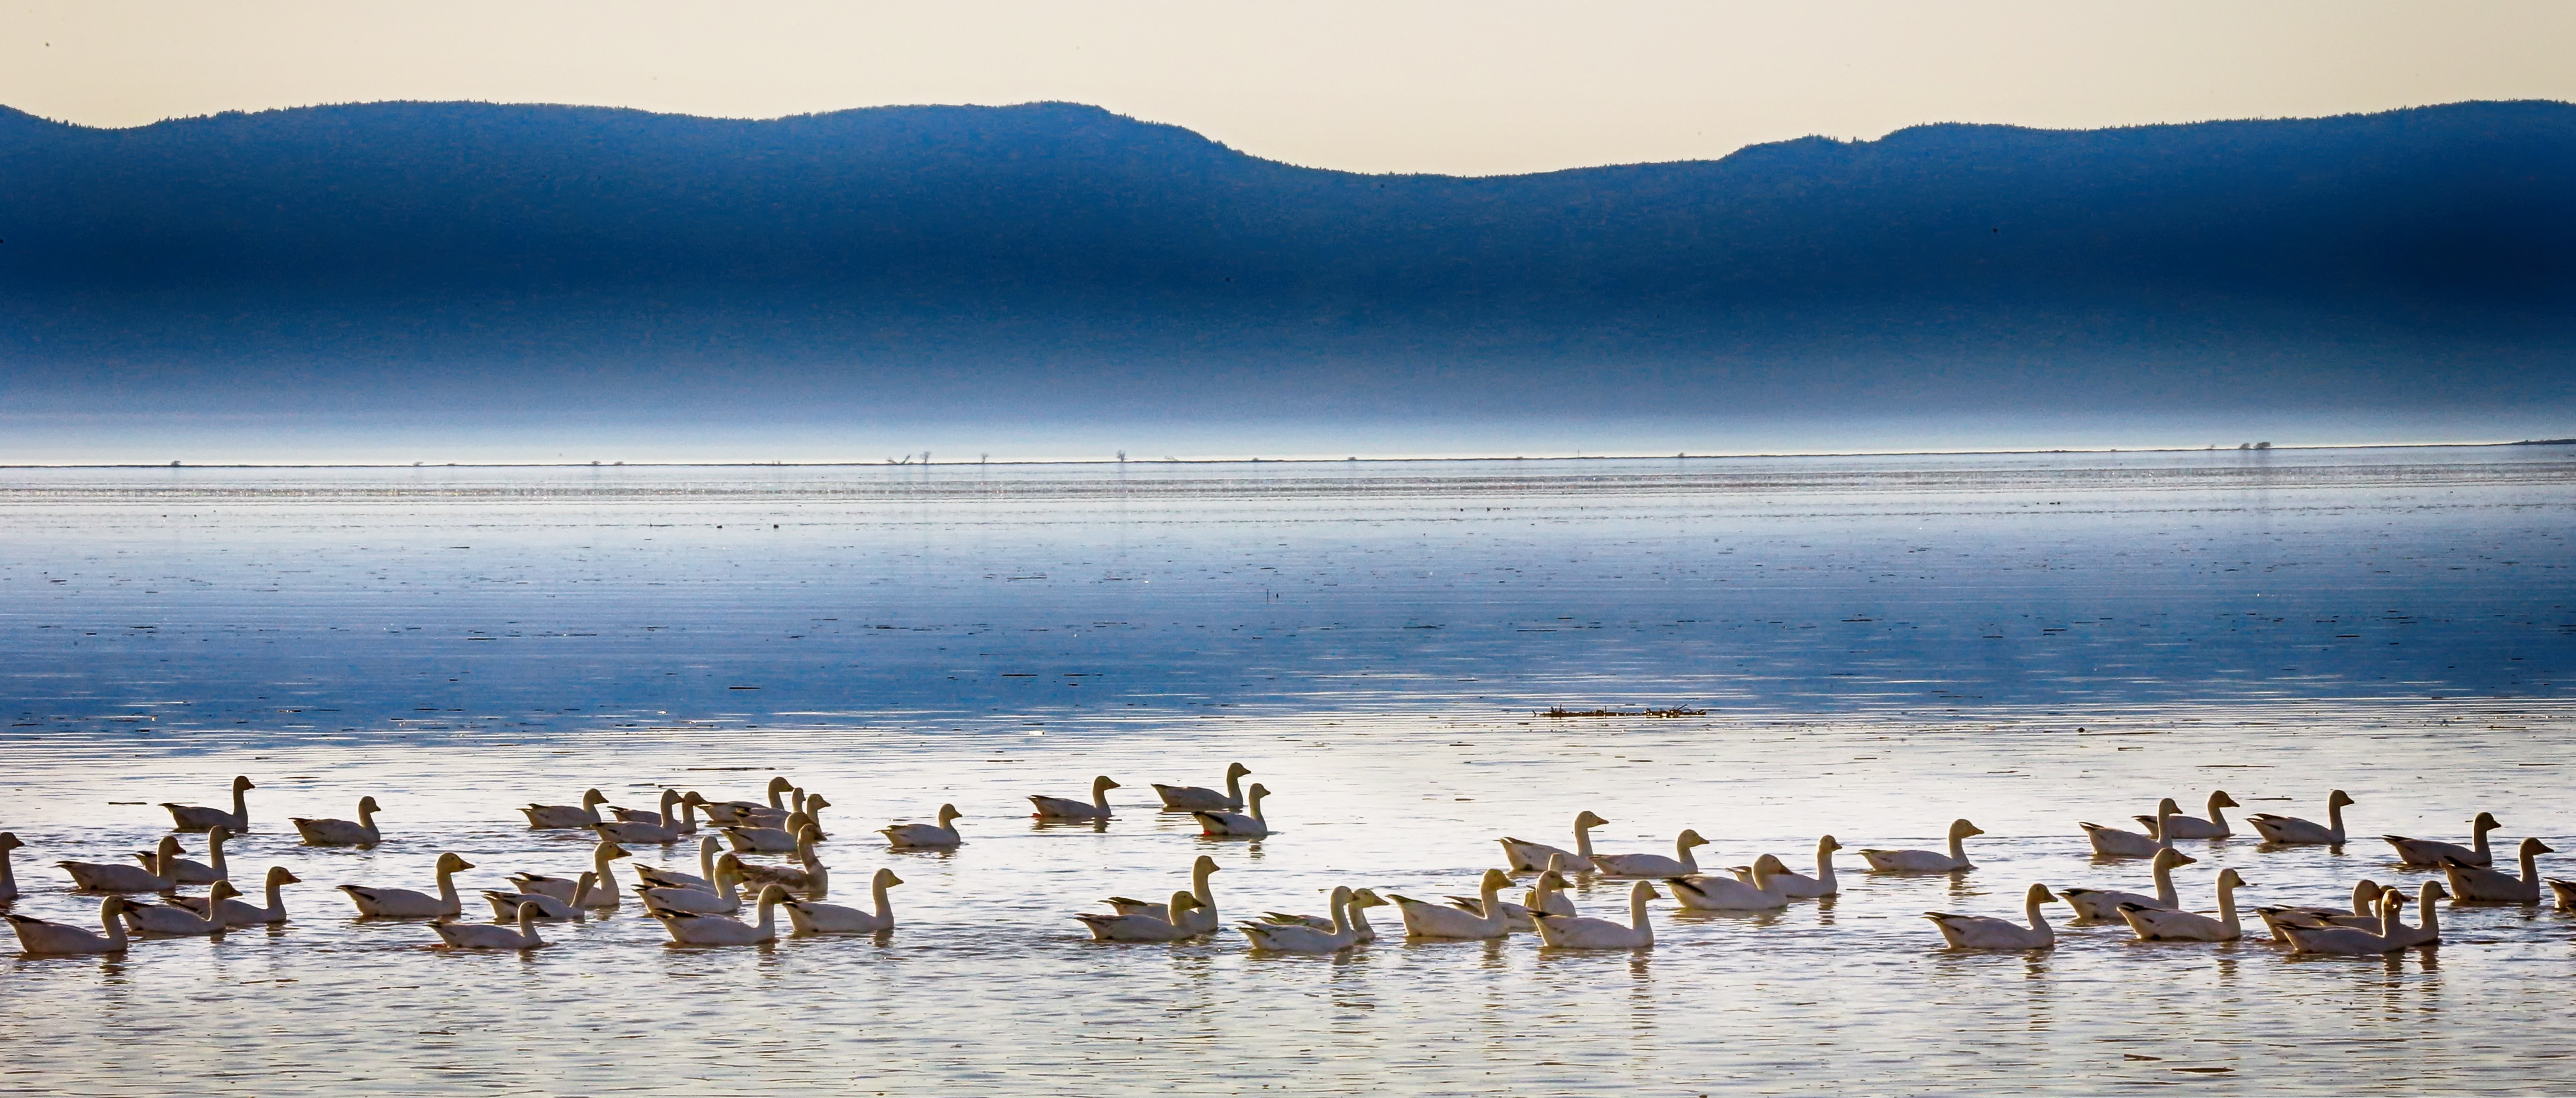 flock of Goose near body of water during day time